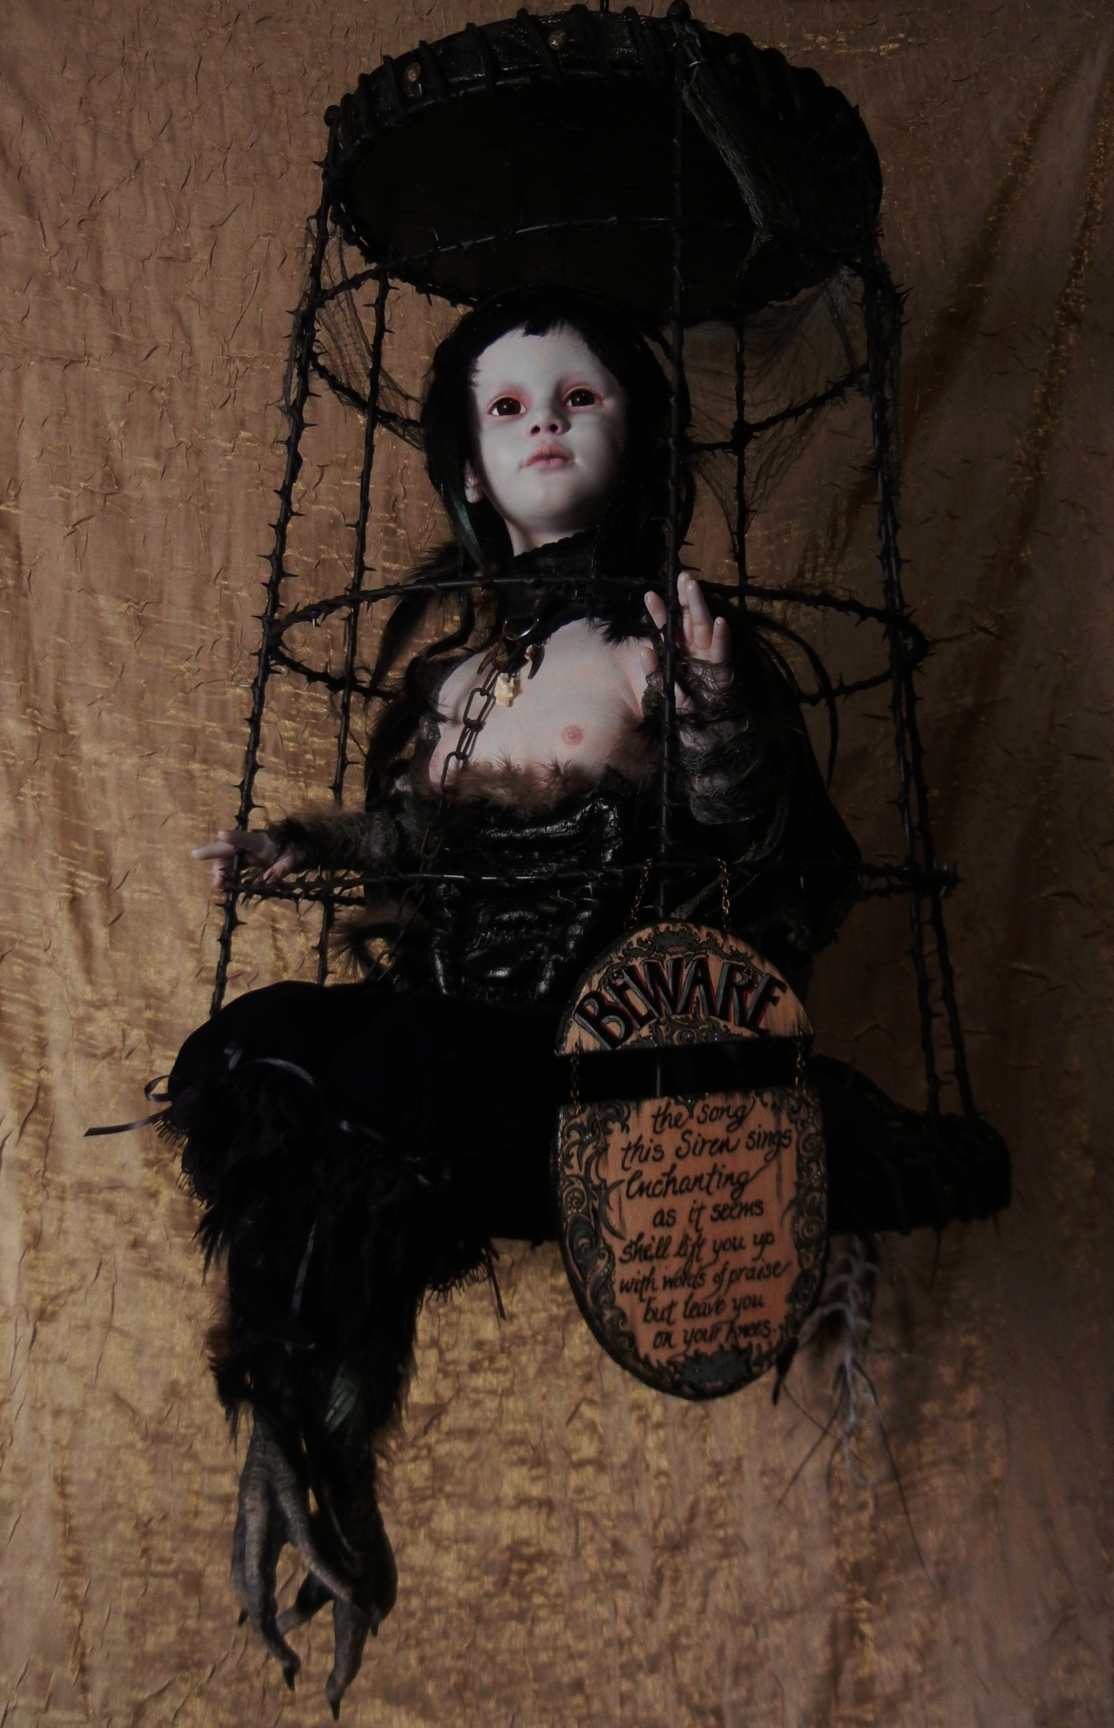 taxidermy artdoll mixed media assemblage of a pale goth doll with black feathered bird feet sitting in a suspended black cage